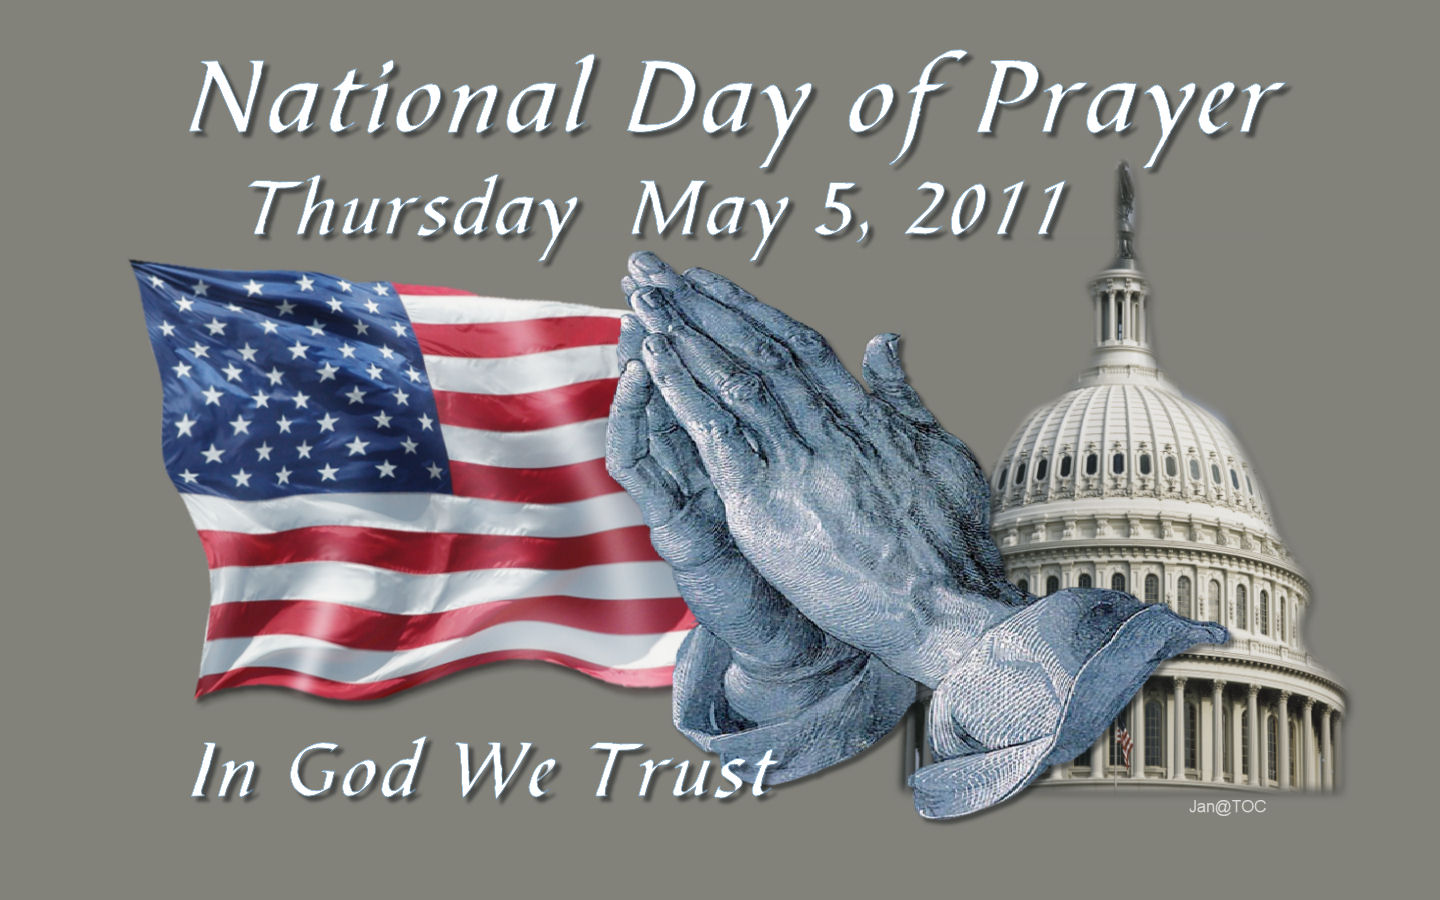 You May Show Original Images And Post About National Day Of Prayer In    